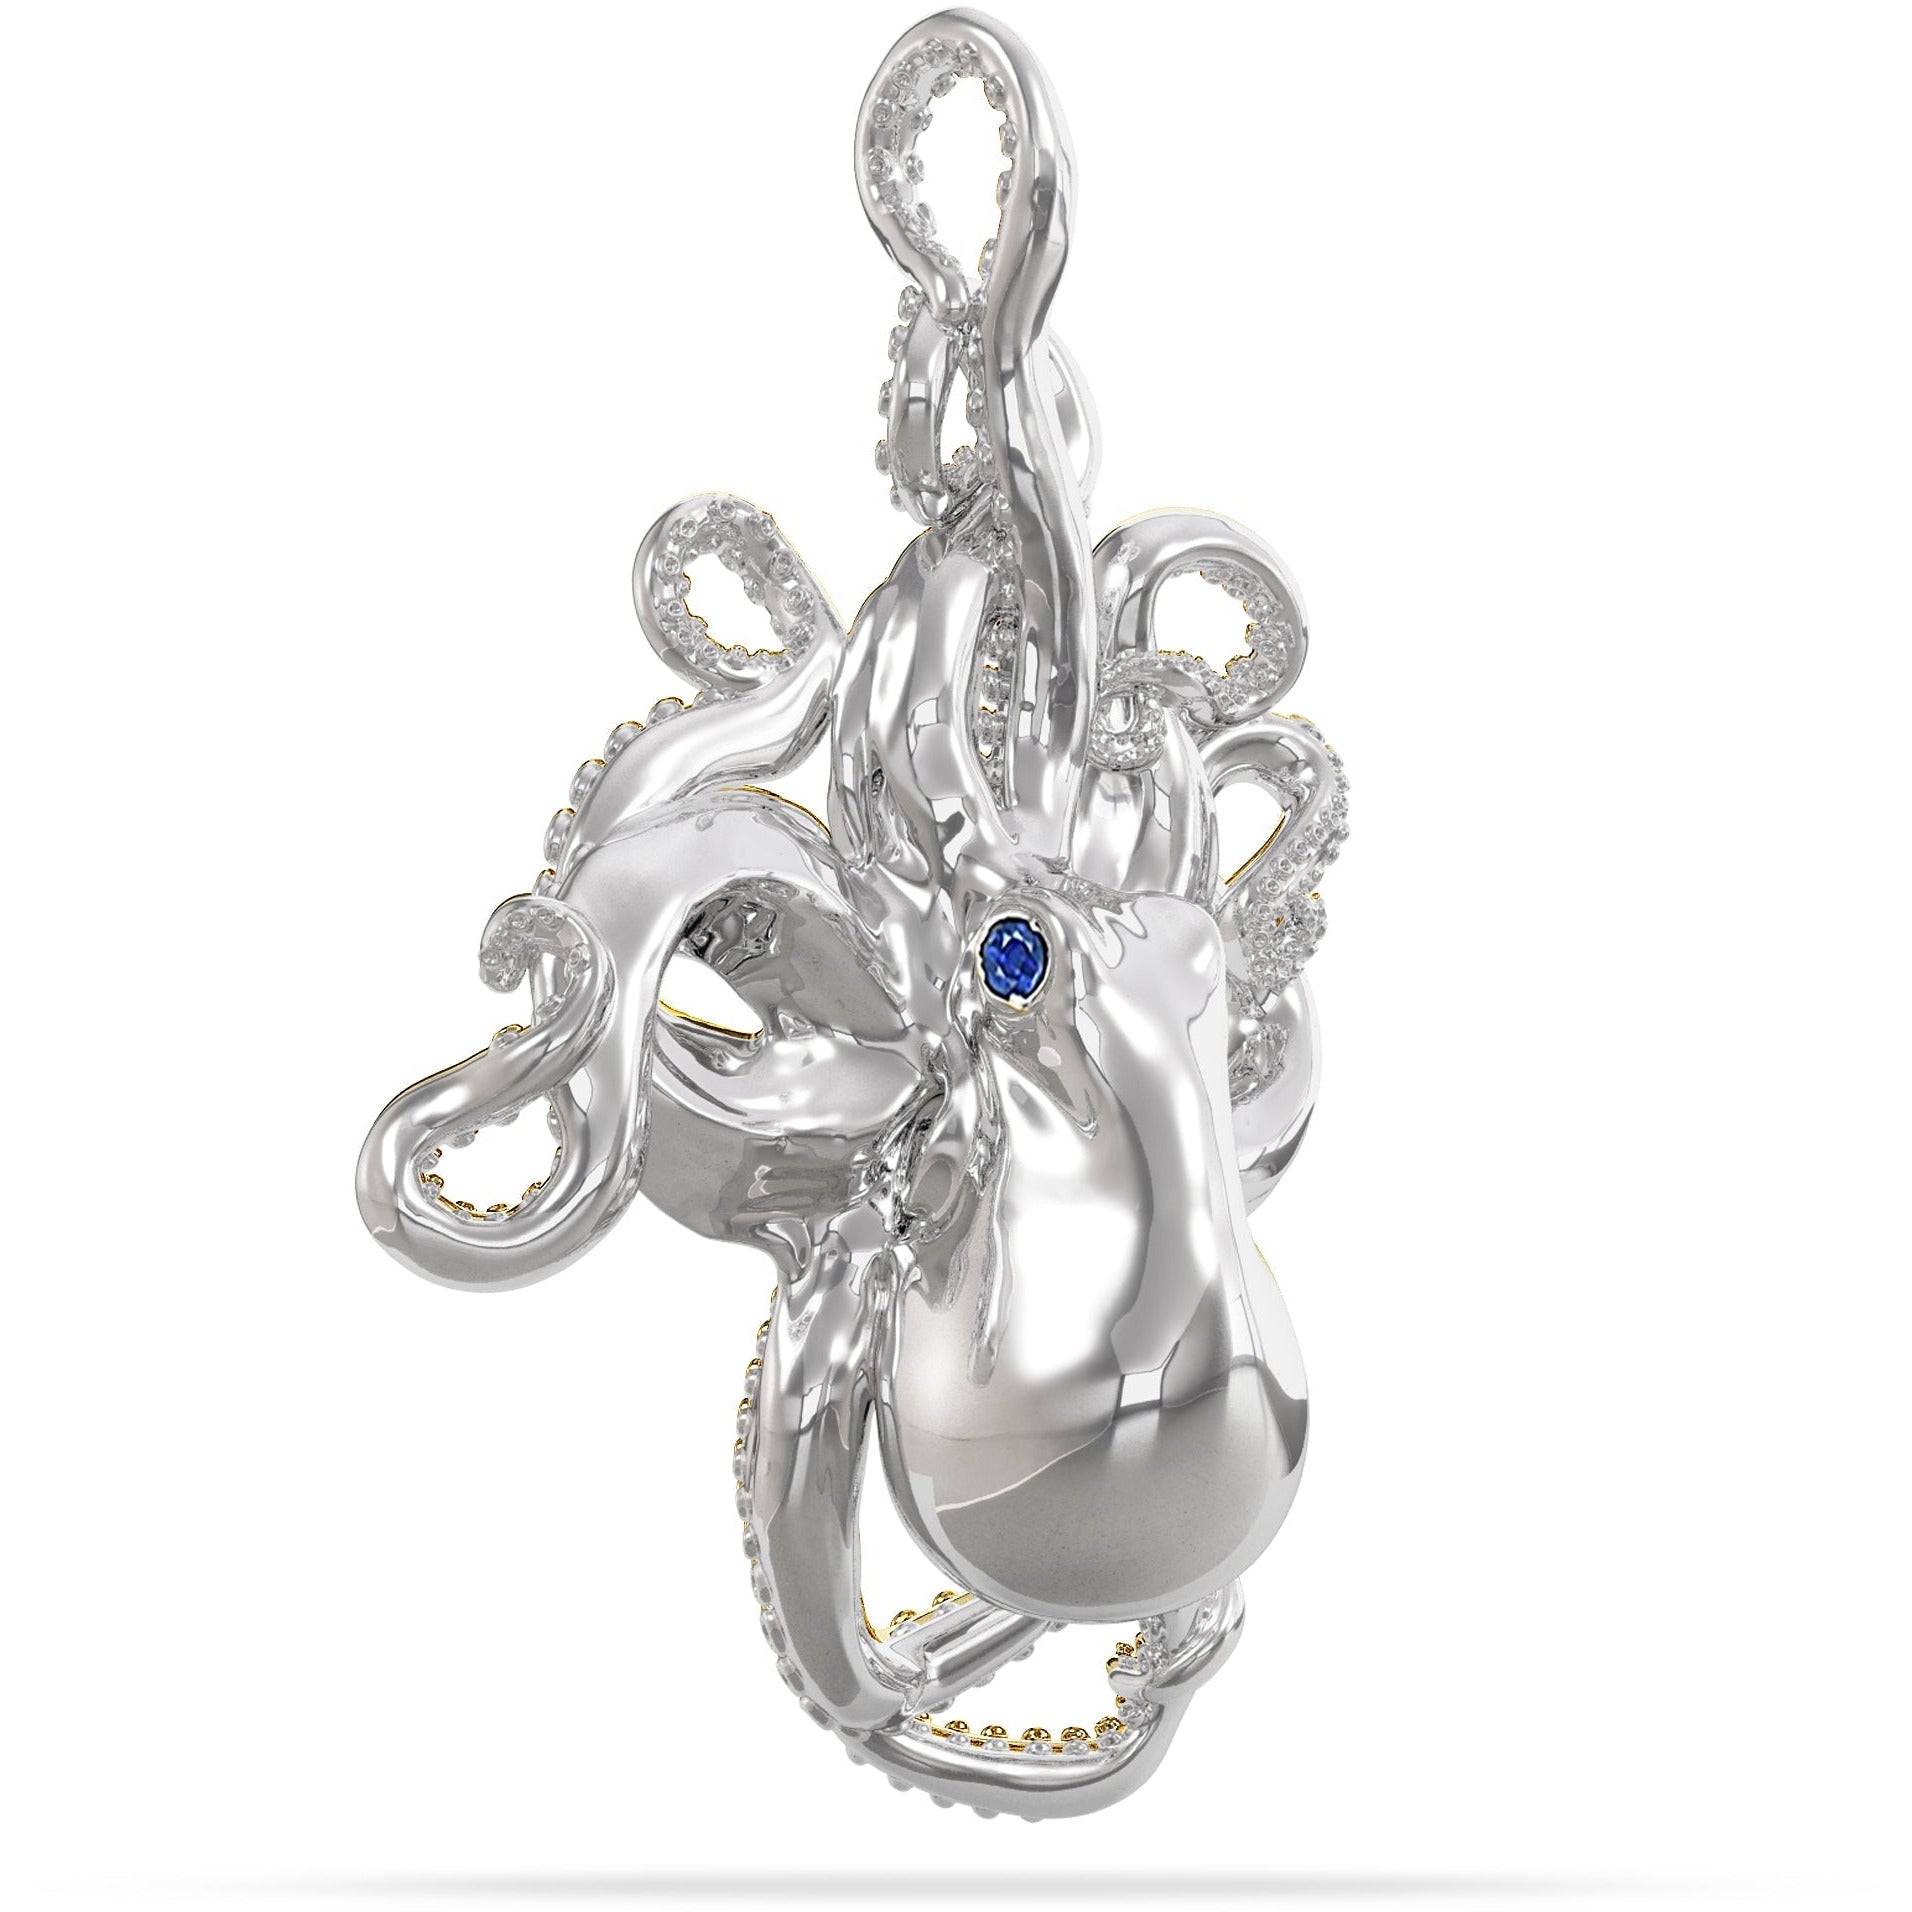 Sterling Silver Octopus Pendant High Polished Mirror Finished Hung by one of its 8 tenticles Custom Designed By Nautical Treasure Jewelry 